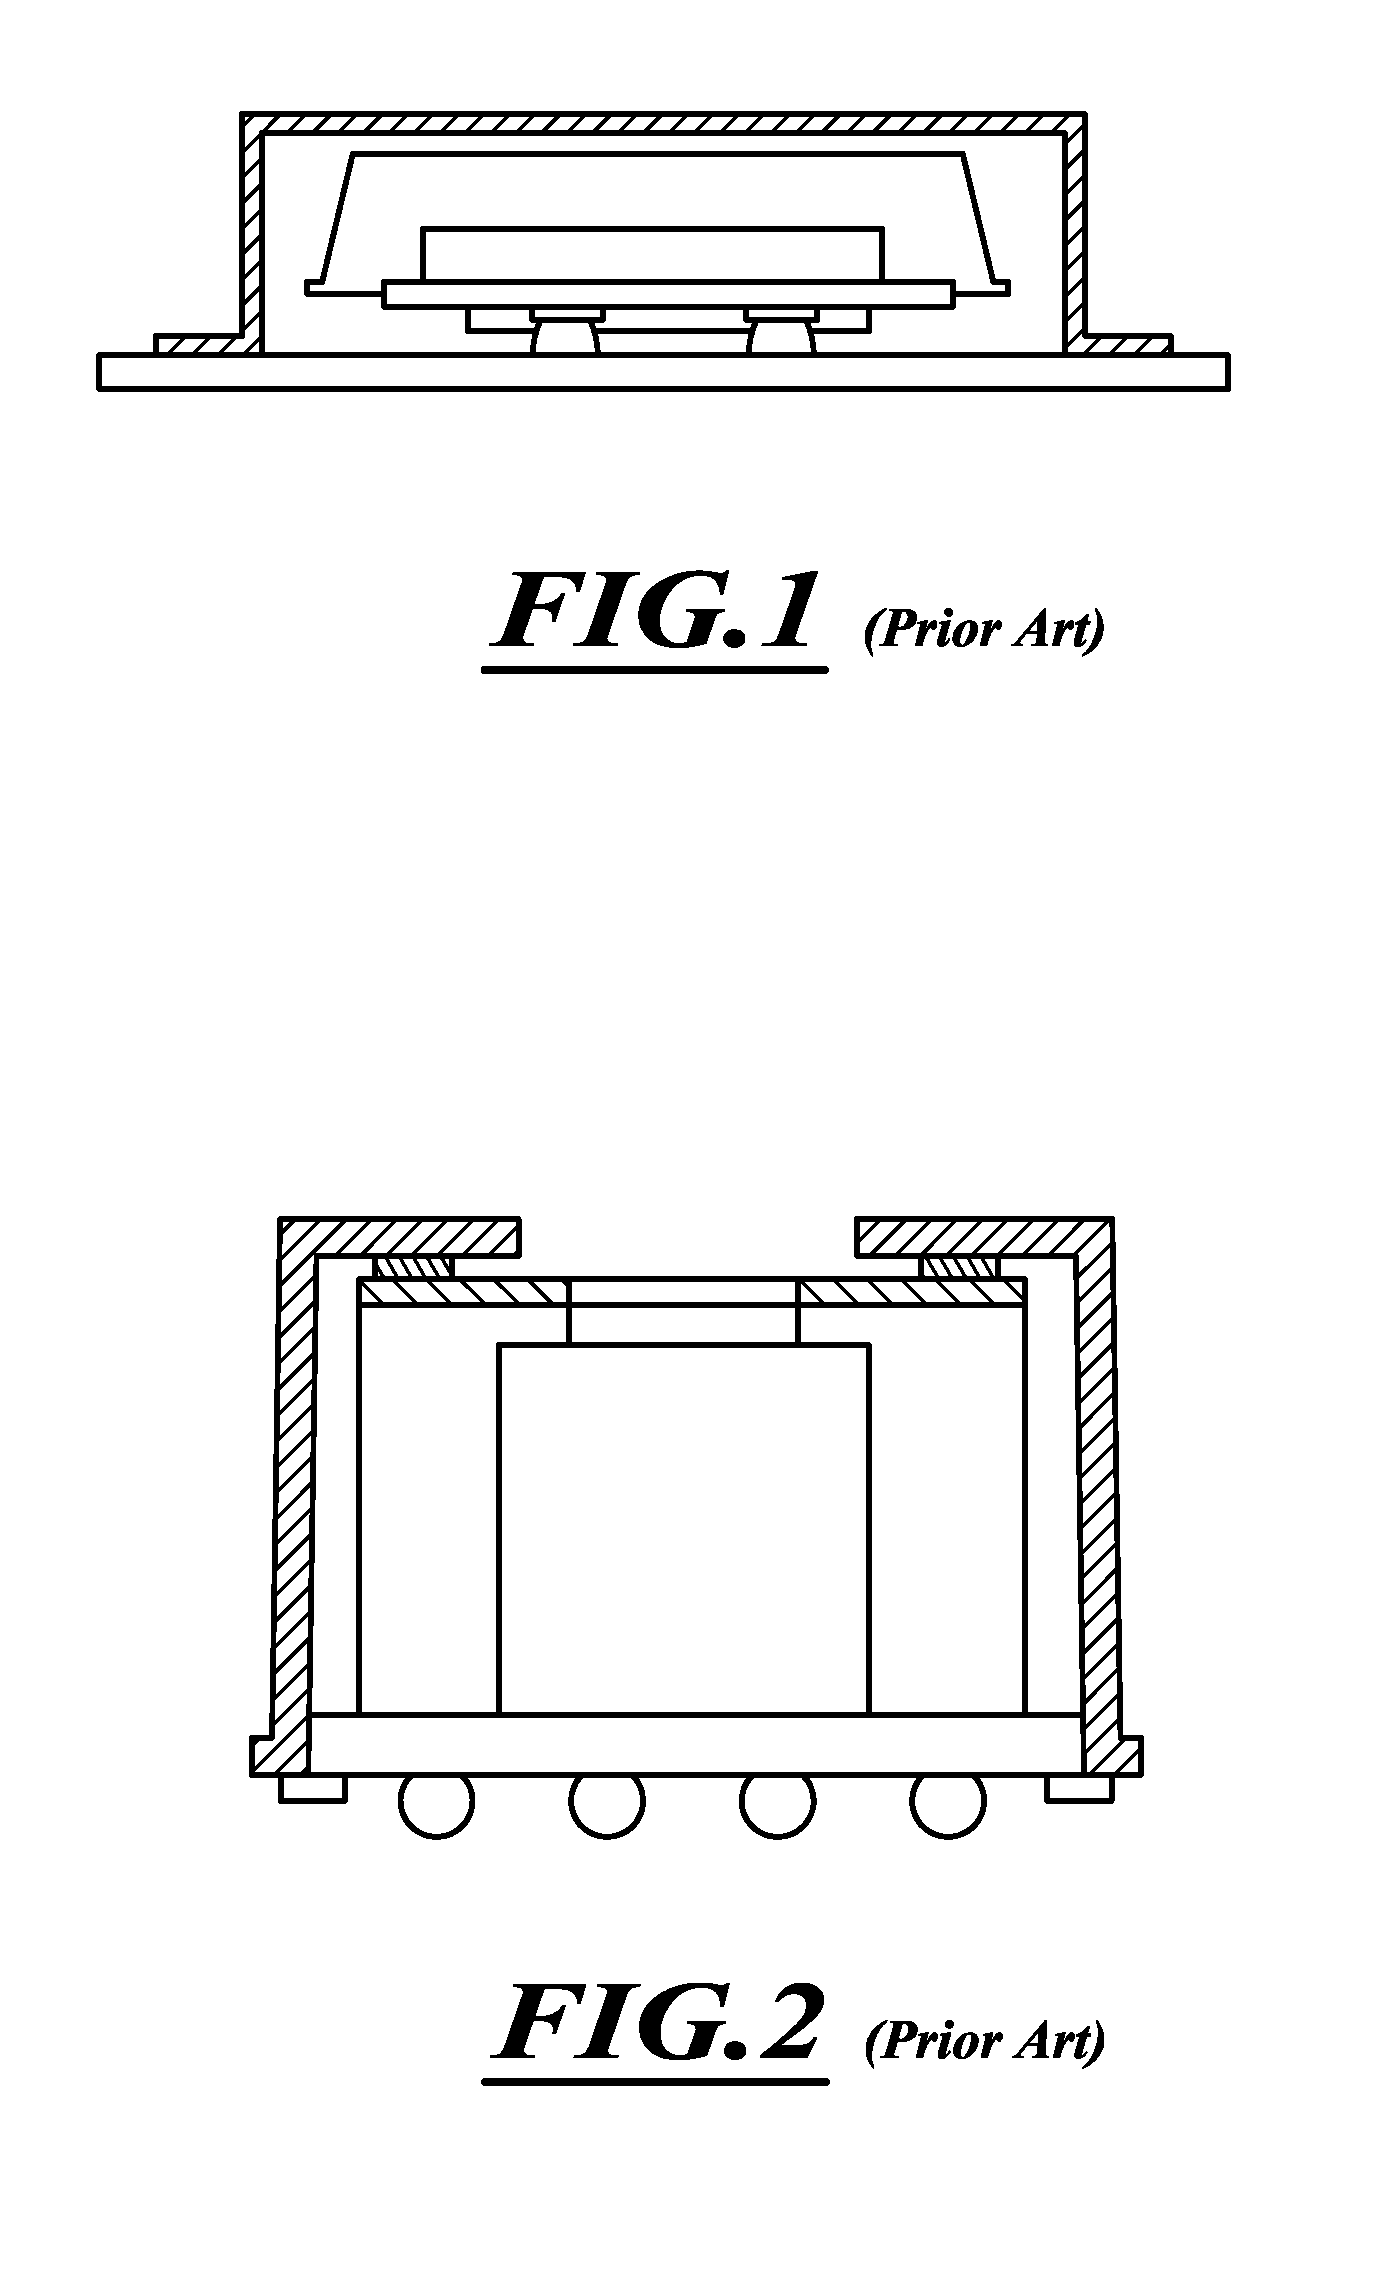 Use of conductive paint as a method of electromagnetic interference shielding on semiconductor devices